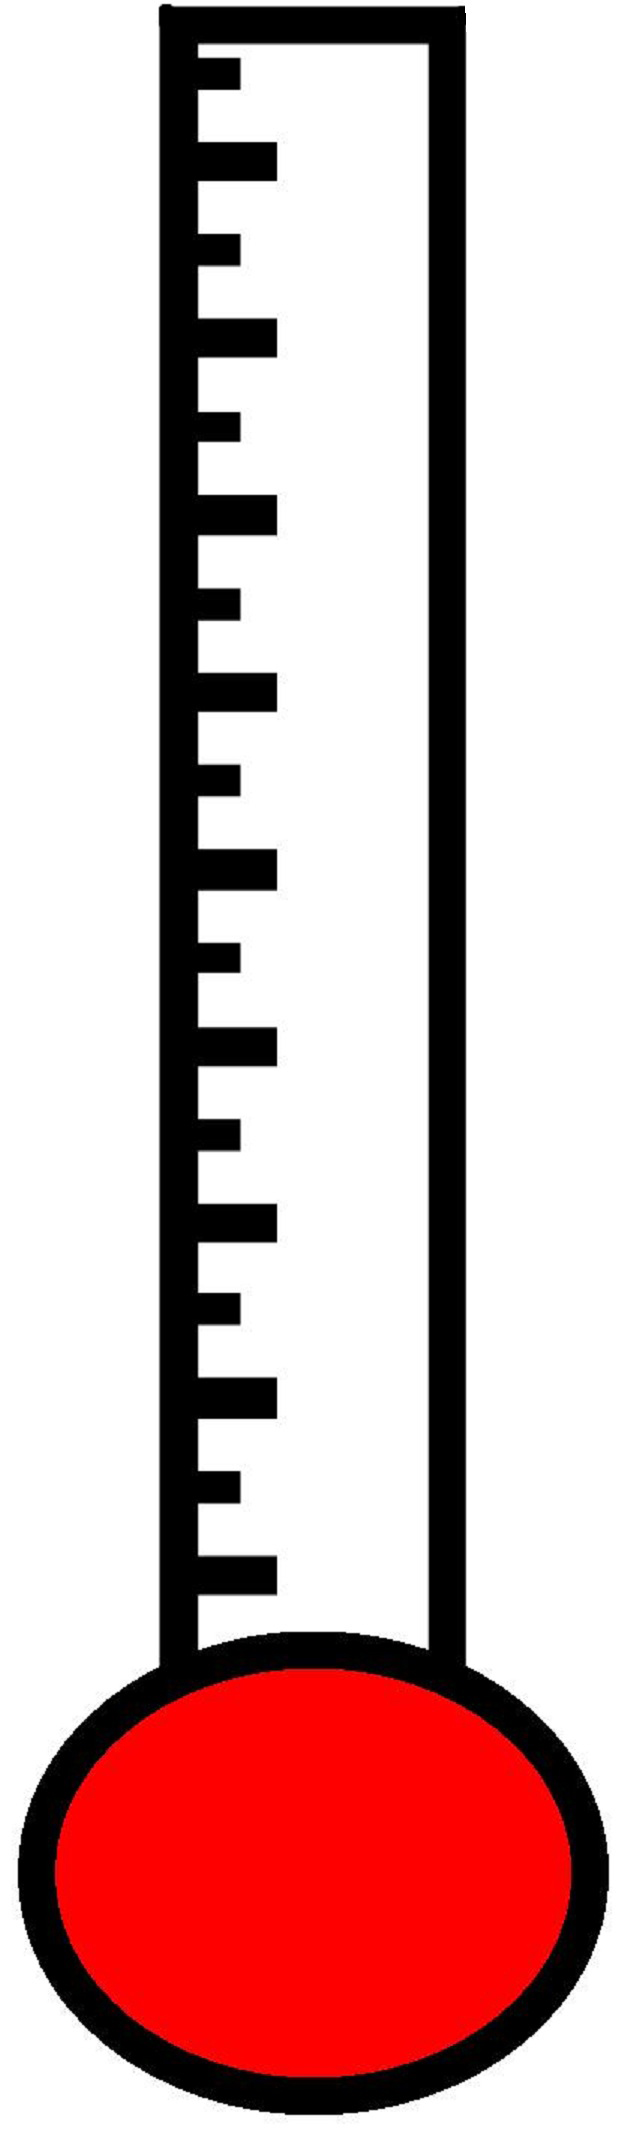 Images For > Blank Thermometer